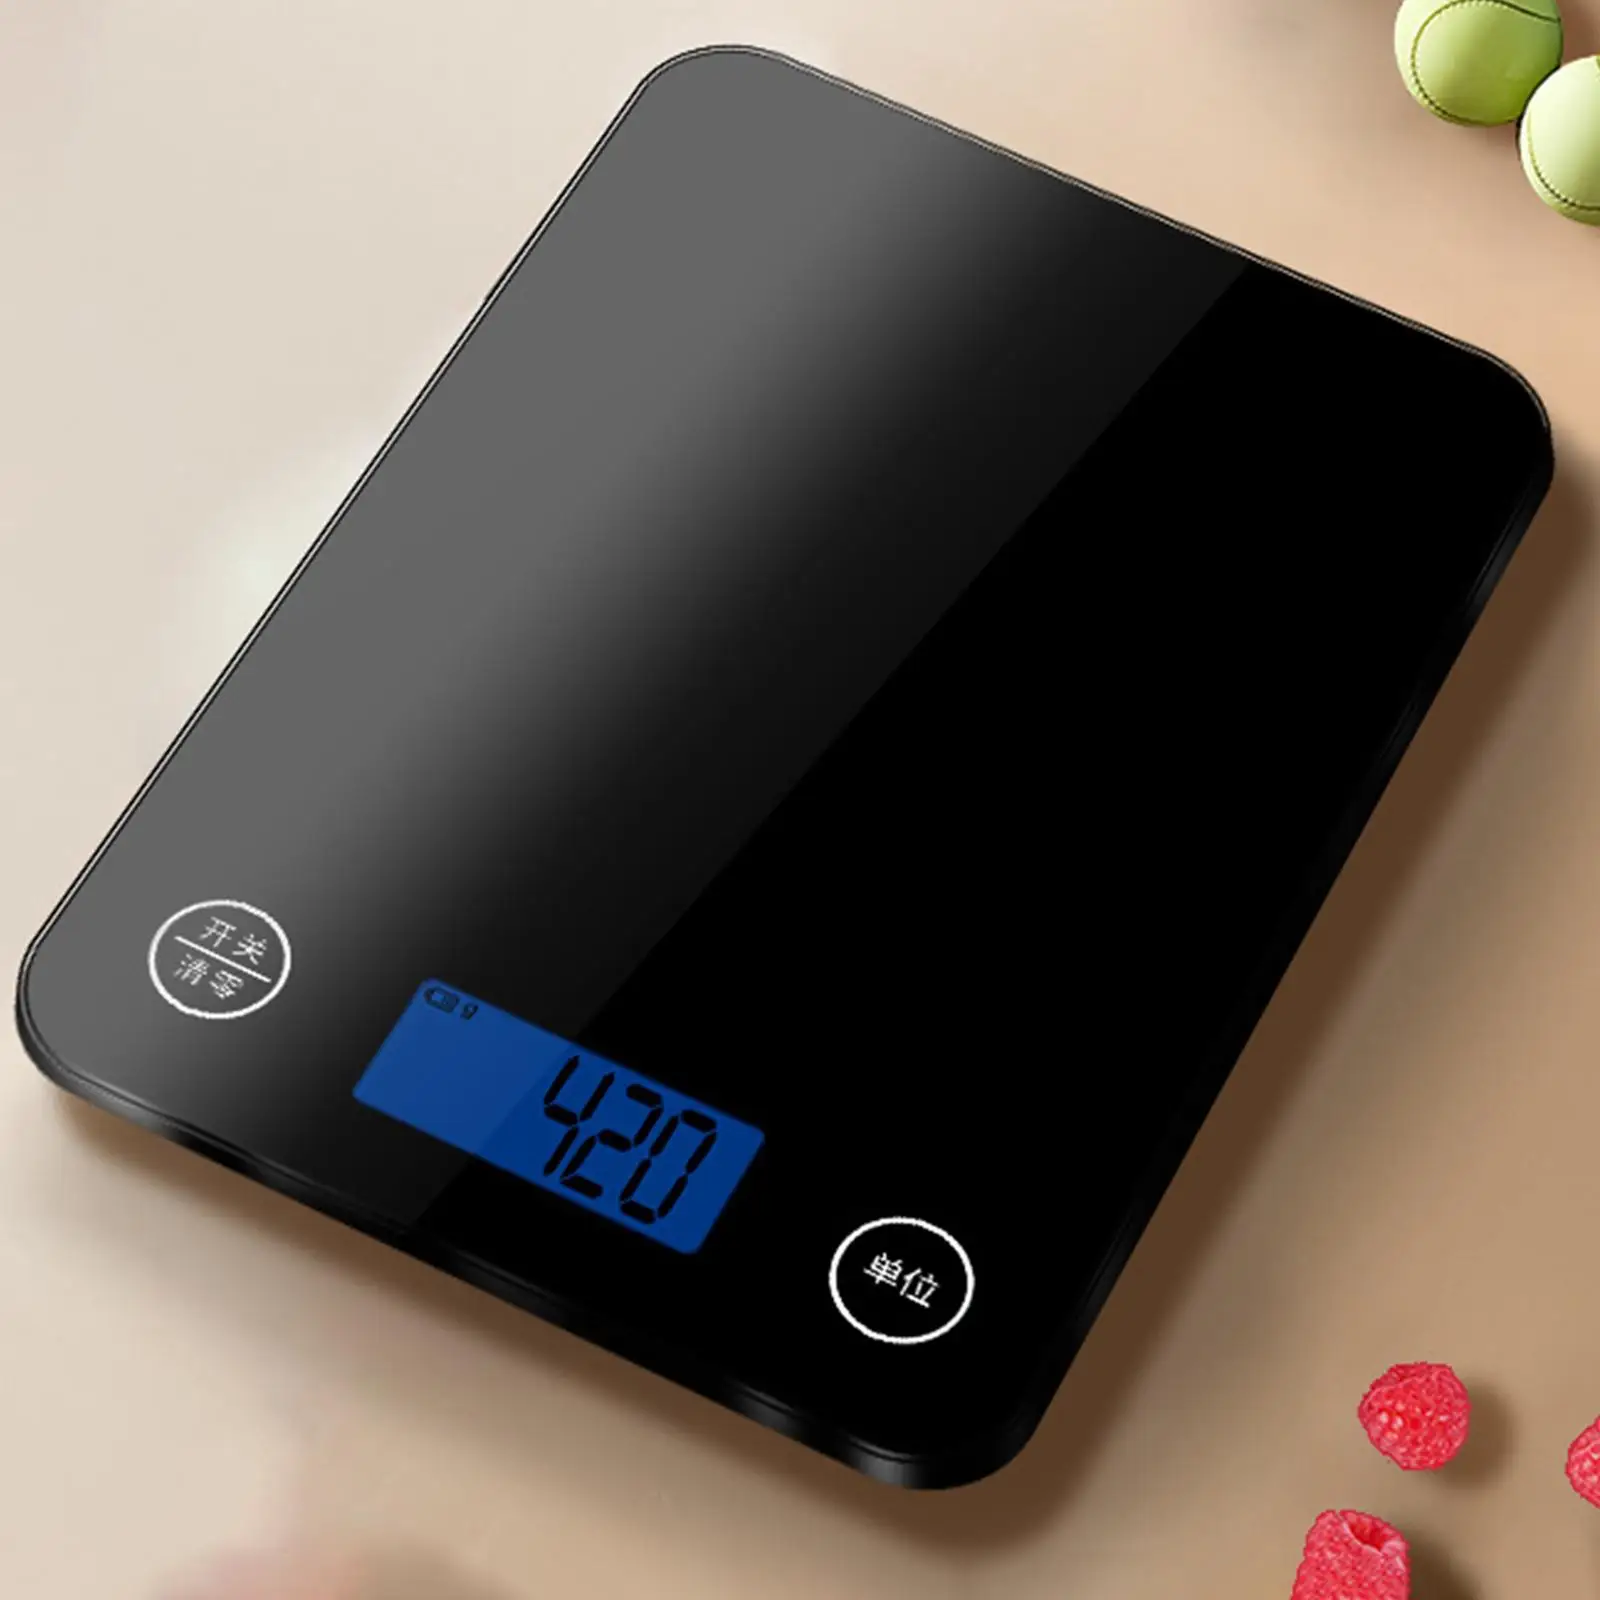 Multifunction Food Scale ml/ct/kg/G/oz/lb/TL LCD Display Multiple Measurement Units Pocket Scale for Kitchen Baking